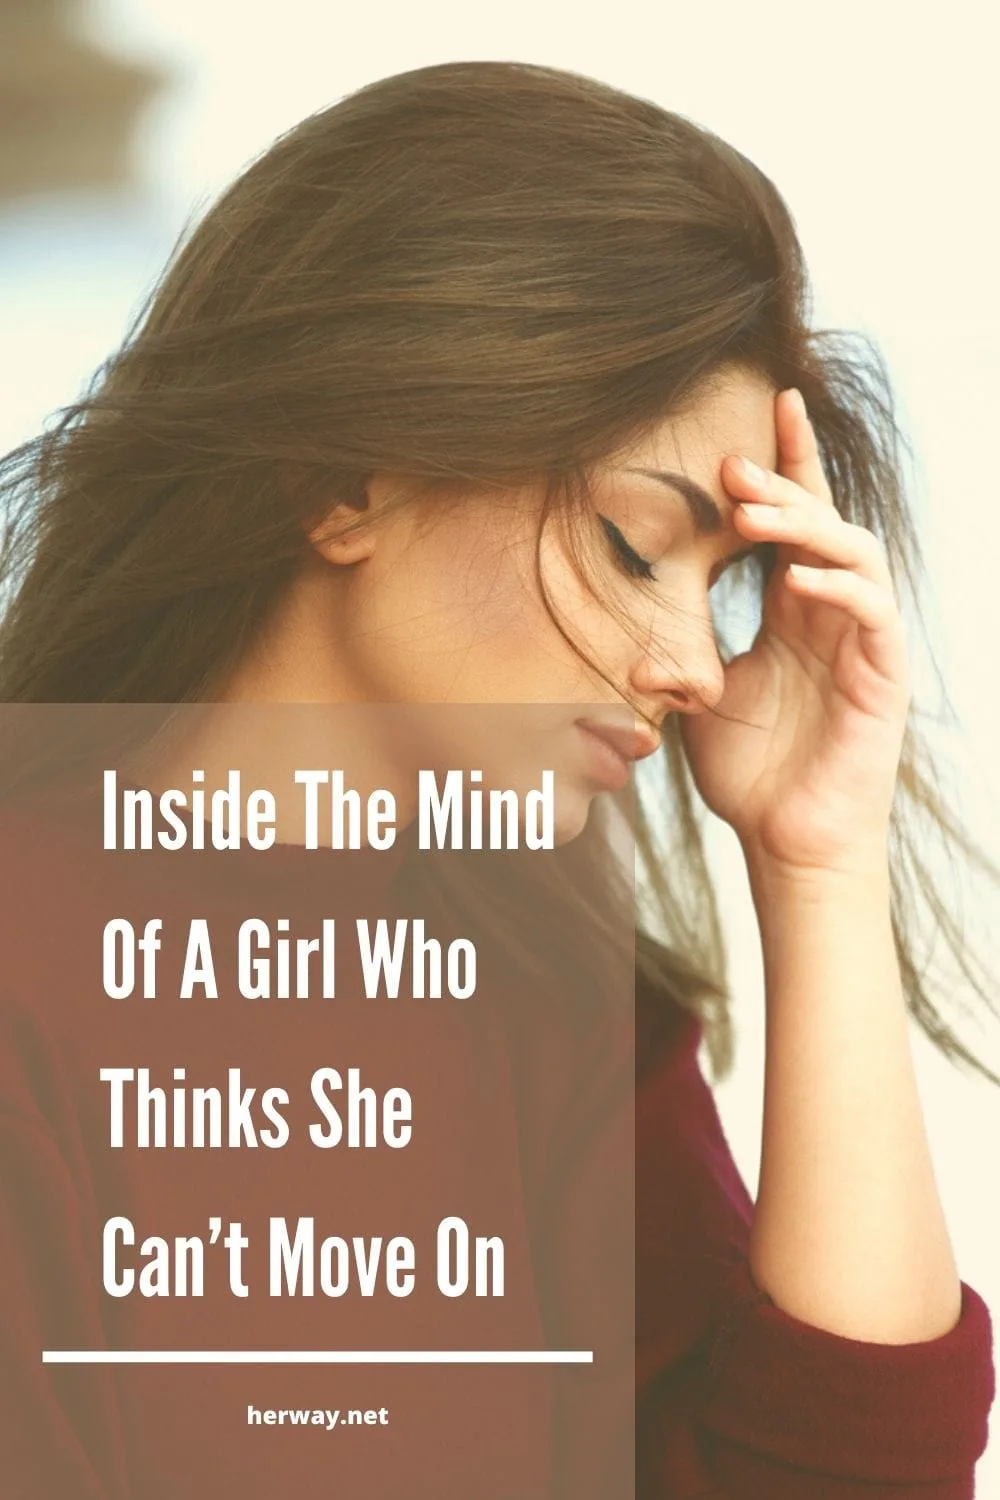 Inside The Mind Of A Girl Who Thinks She Can’t Move On